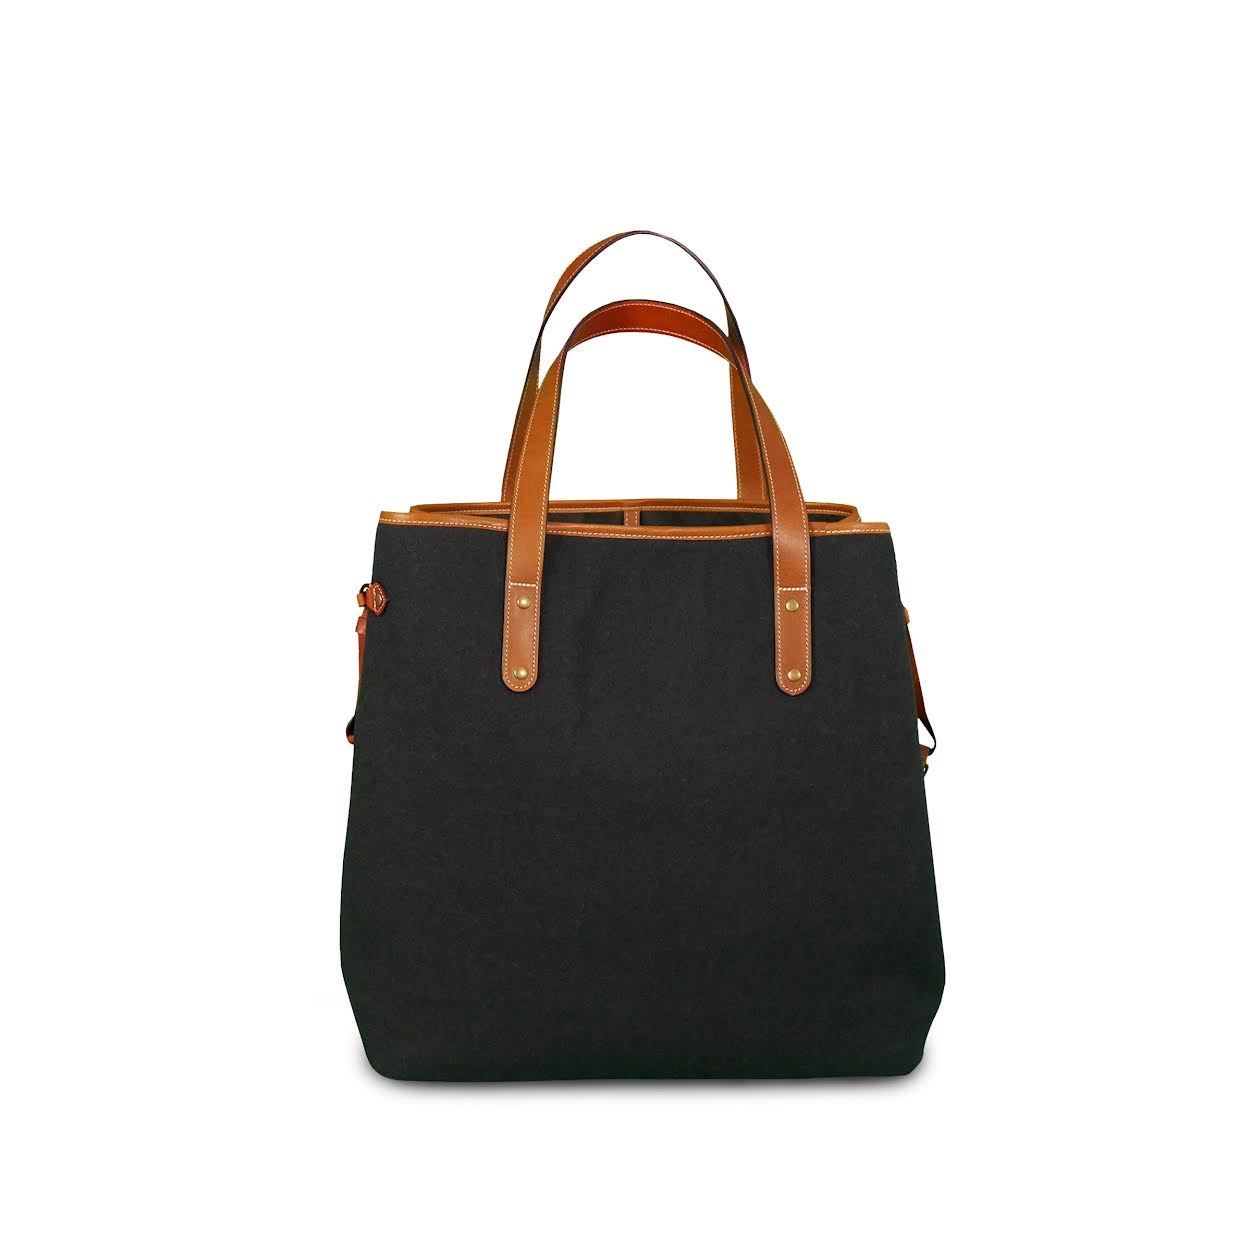 Heritage Gear Infinity Tote